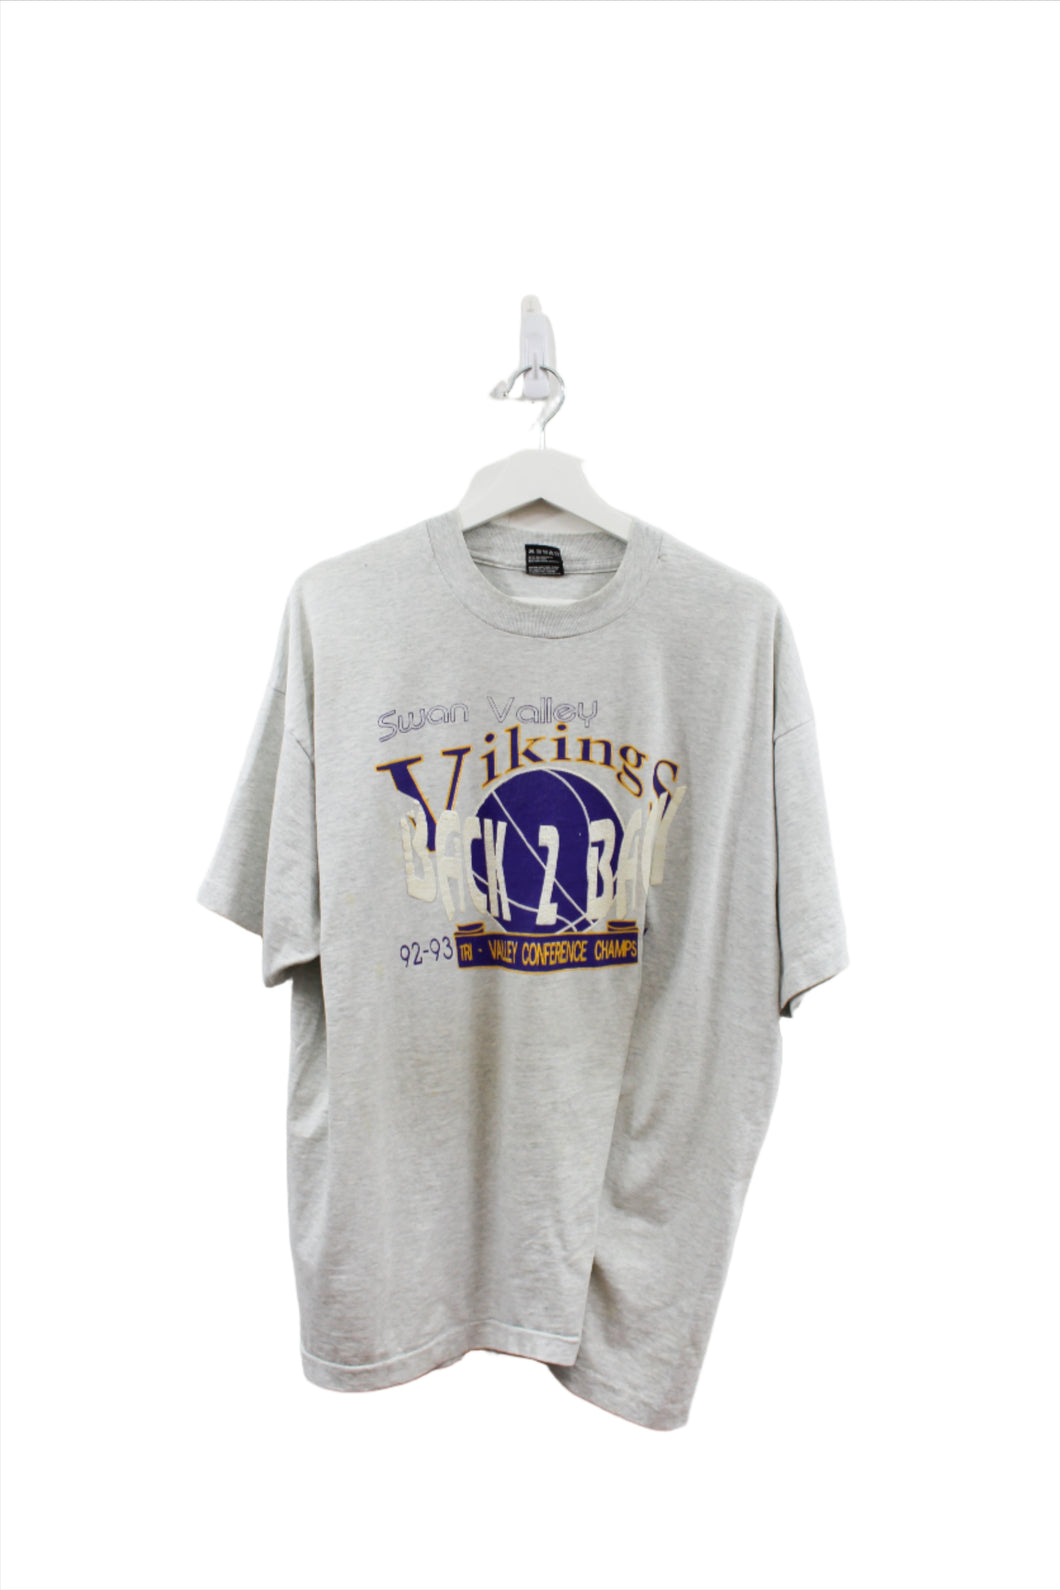 Z - Vintage 94' Single Stitch Swan Valley Vikings Conference Tee